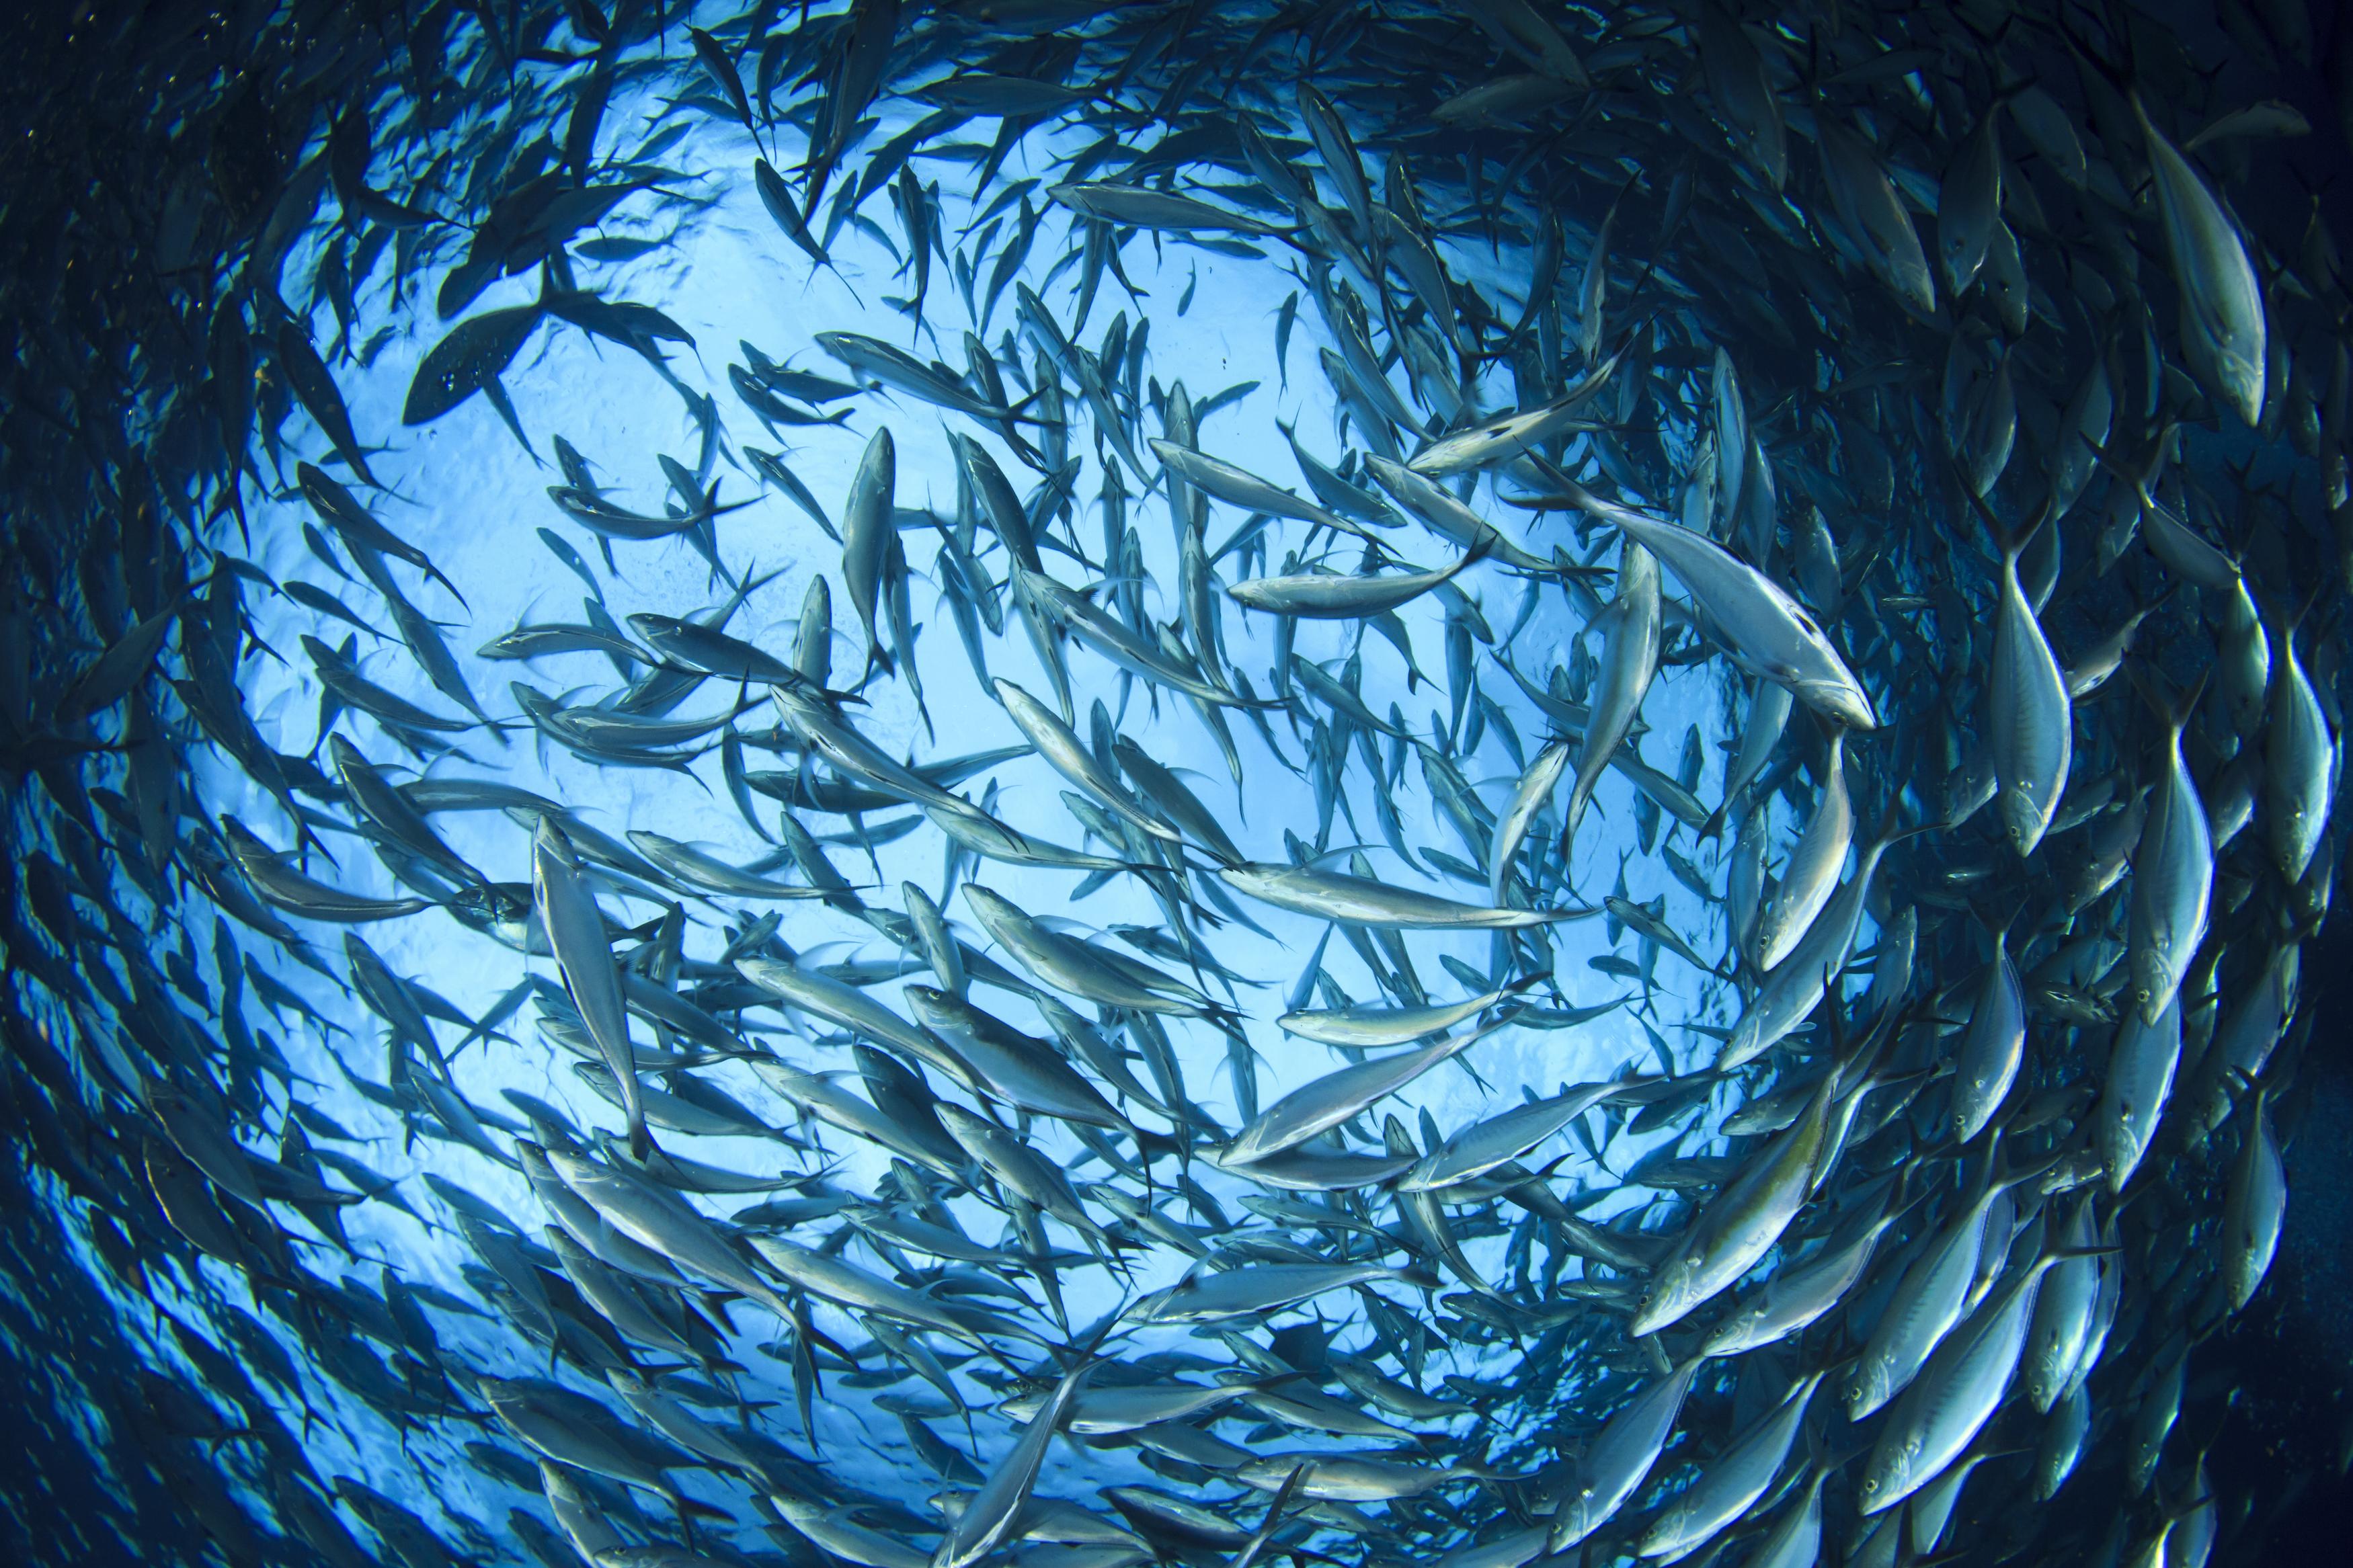 A large number of tuna swim in a circle